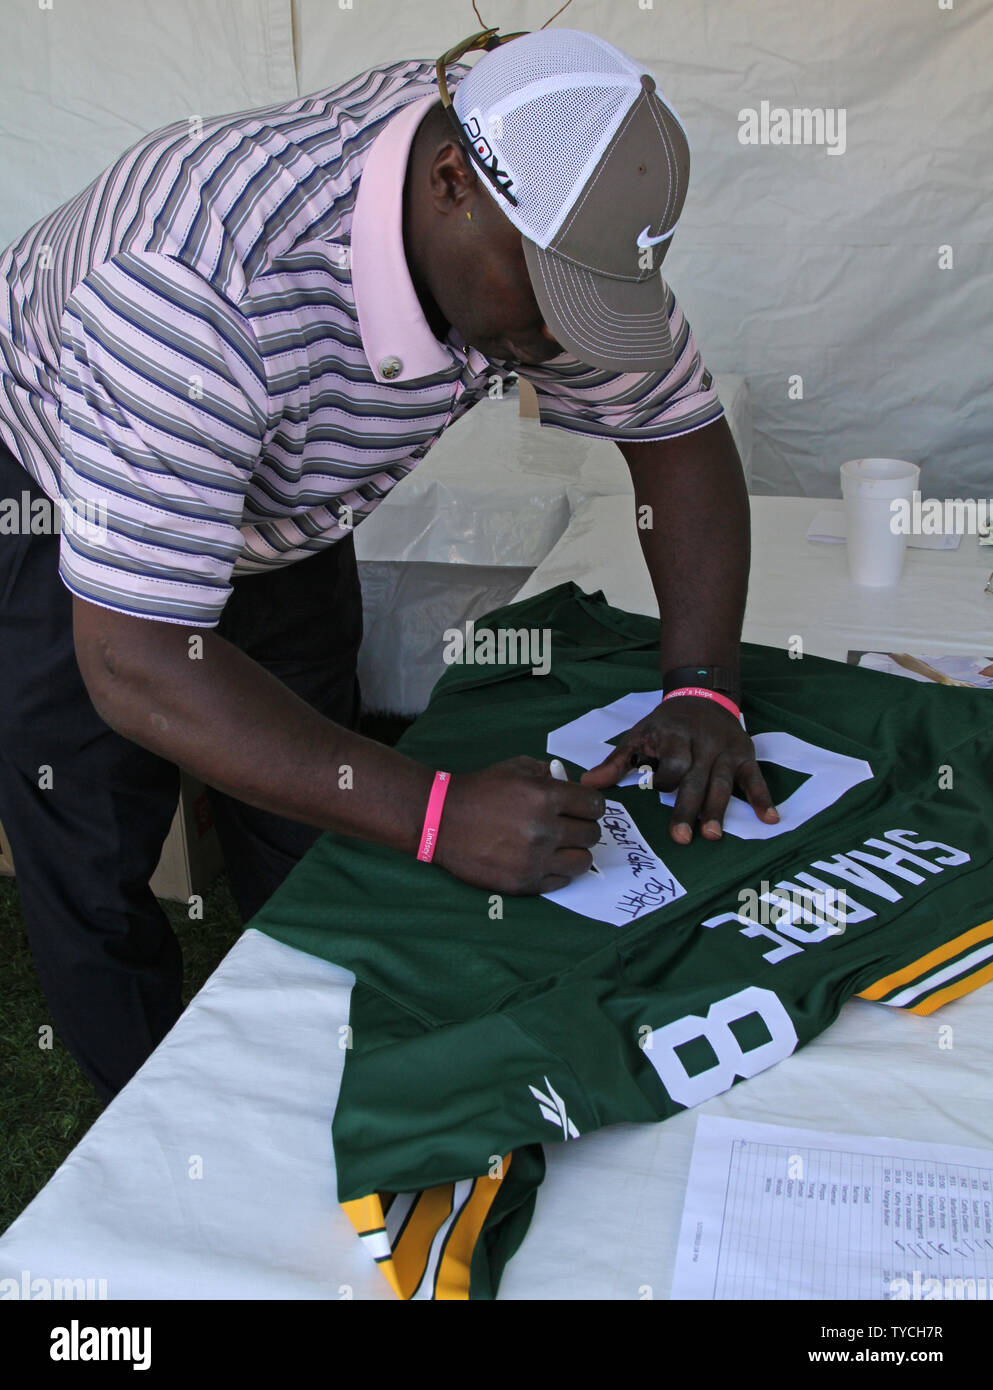 Former NFL player and current TV analyst Sterling Sharpe autographs a jersey during the Bob Hope Chrysler Classic at PGA West in La Quinta, California on January 22, 2011.  The tournament teams professional and amateur golfers with celebrities and has been raising money for a variety of charities since 1960.   UPI/ David Silpa Stock Photo